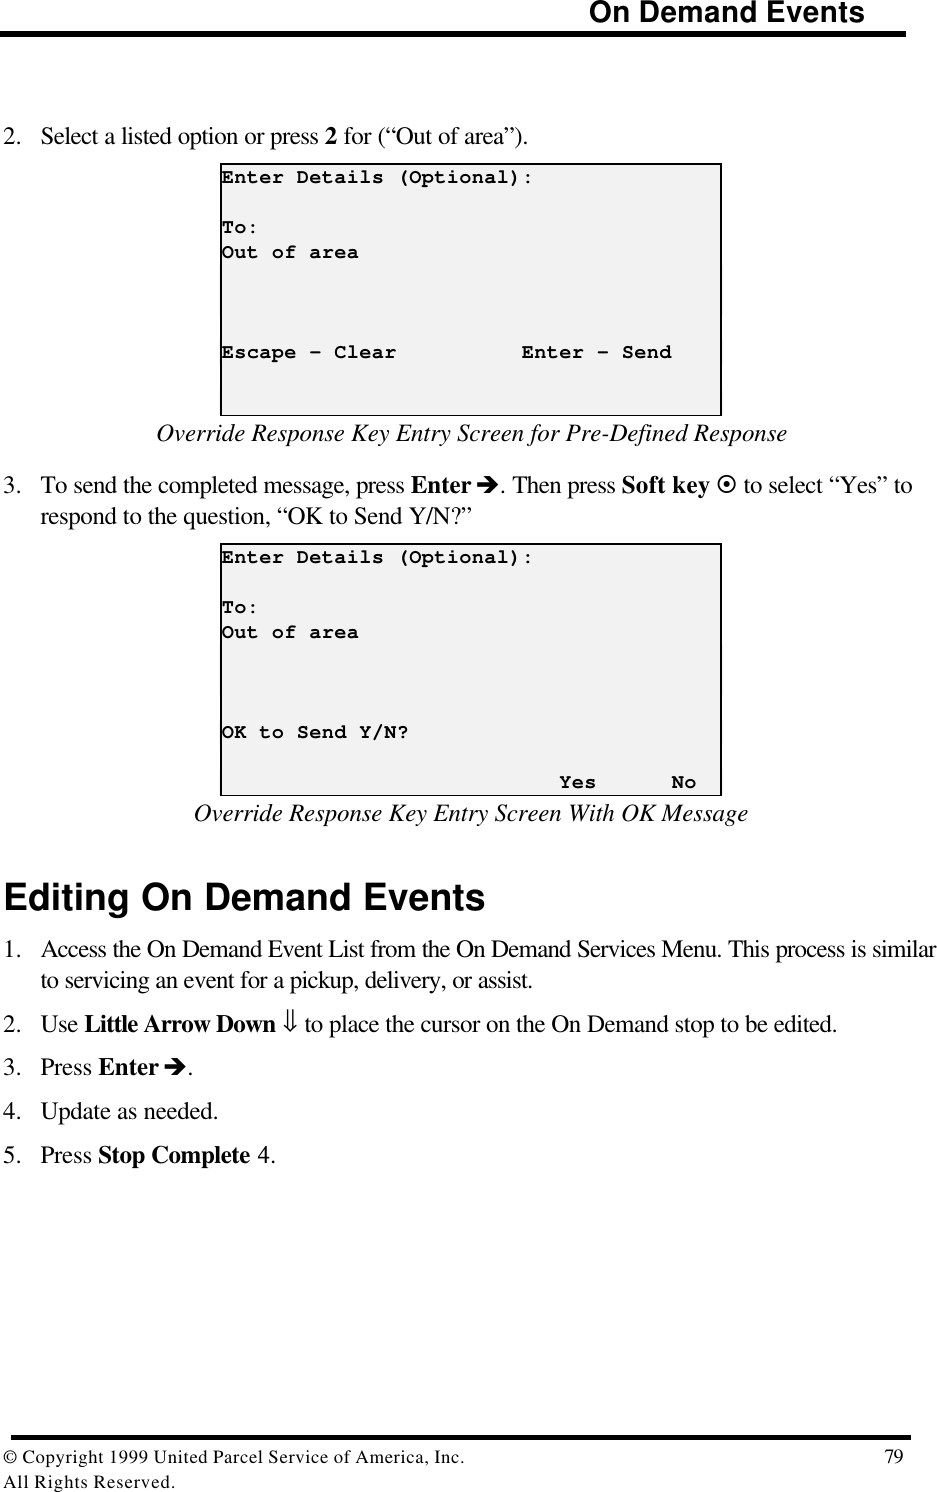                                                                            On Demand Events© Copyright 1999 United Parcel Service of America, Inc.  79All Rights Reserved.2. Select a listed option or press 2 for (“Out of area”).Enter Details (Optional):To:Out of areaEscape - Clear          Enter - SendOverride Response Key Entry Screen for Pre-Defined Response3. To send the completed message, press Enter è. Then press Soft key ¤ to select “Yes” torespond to the question, “OK to Send Y/N?”Enter Details (Optional):To:Out of areaOK to Send Y/N?                           Yes      NoOverride Response Key Entry Screen With OK MessageEditing On Demand Events1. Access the On Demand Event List from the On Demand Services Menu. This process is similarto servicing an event for a pickup, delivery, or assist.2. Use Little Arrow Down ⇓ to place the cursor on the On Demand stop to be edited.3. Press Enter è.4. Update as needed.5. Press Stop Complete 4.